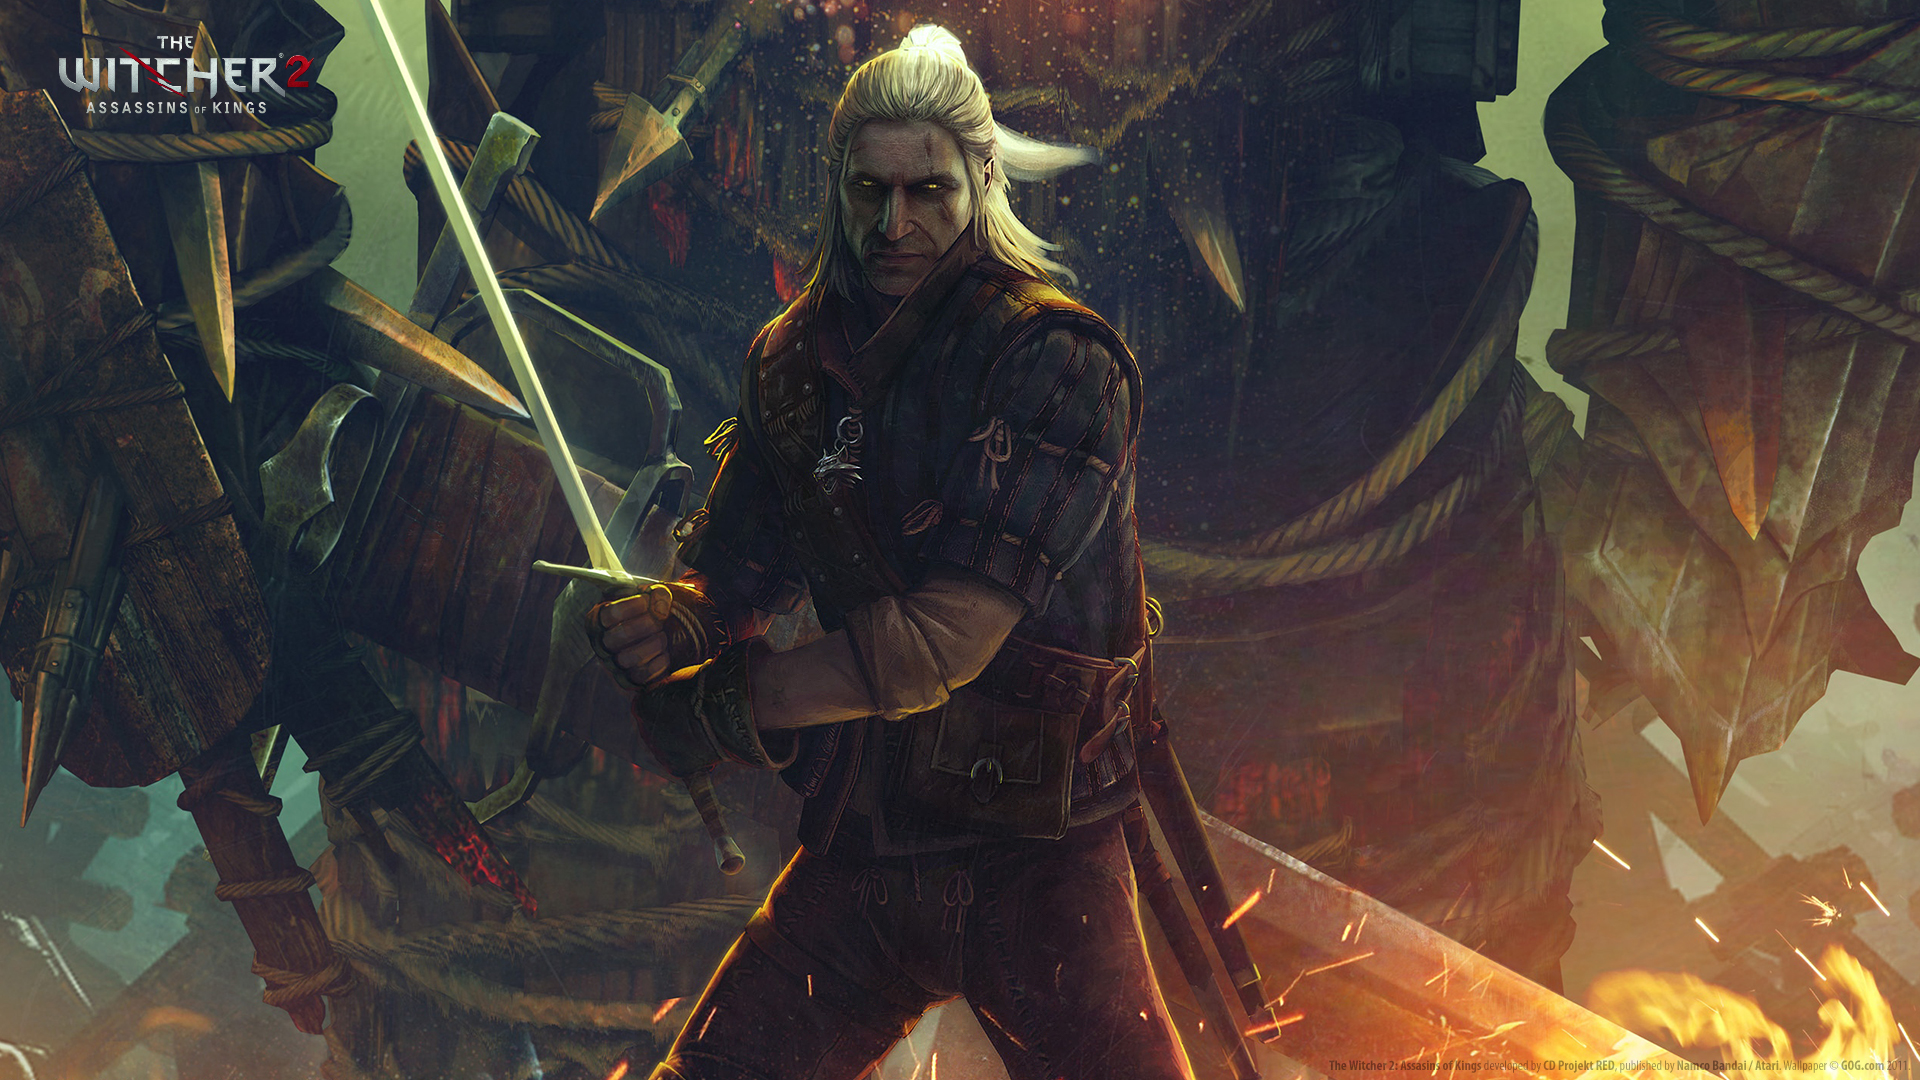 Free download wallpaper Video Game, The Witcher, The Witcher 2: Assassins Of Kings, Geralt Of Rivia on your PC desktop